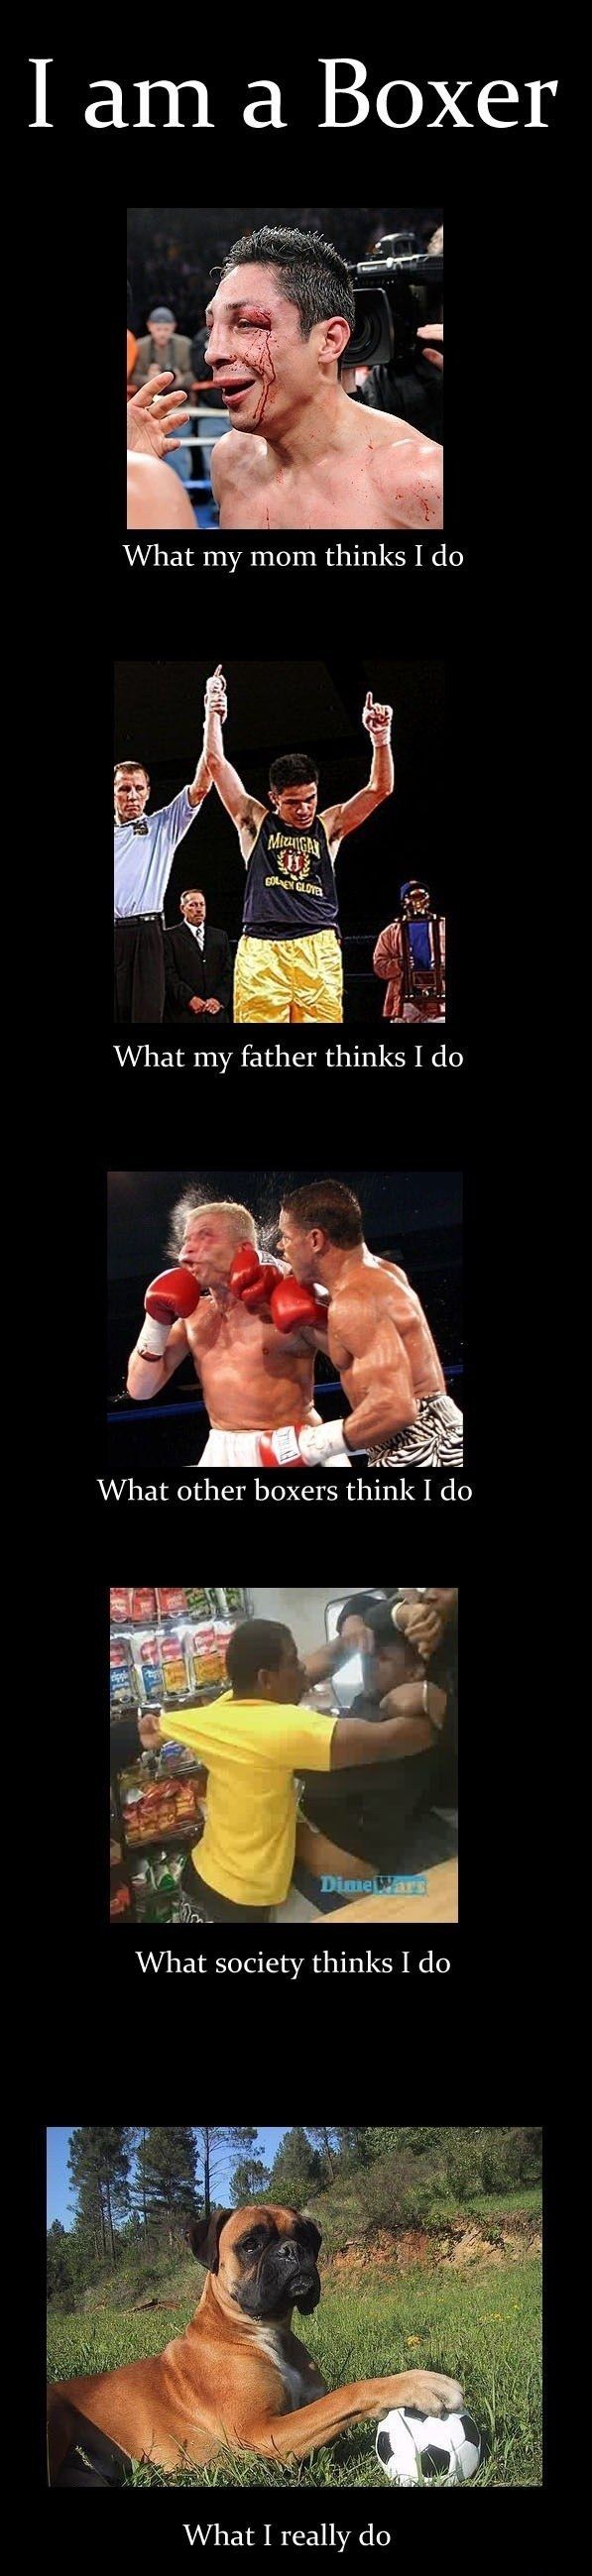 I am a Boxer
 What my mom thinks I do
 What my father thinks I do
 What other boxer think I do
 What society thinks I do
 What I Really do